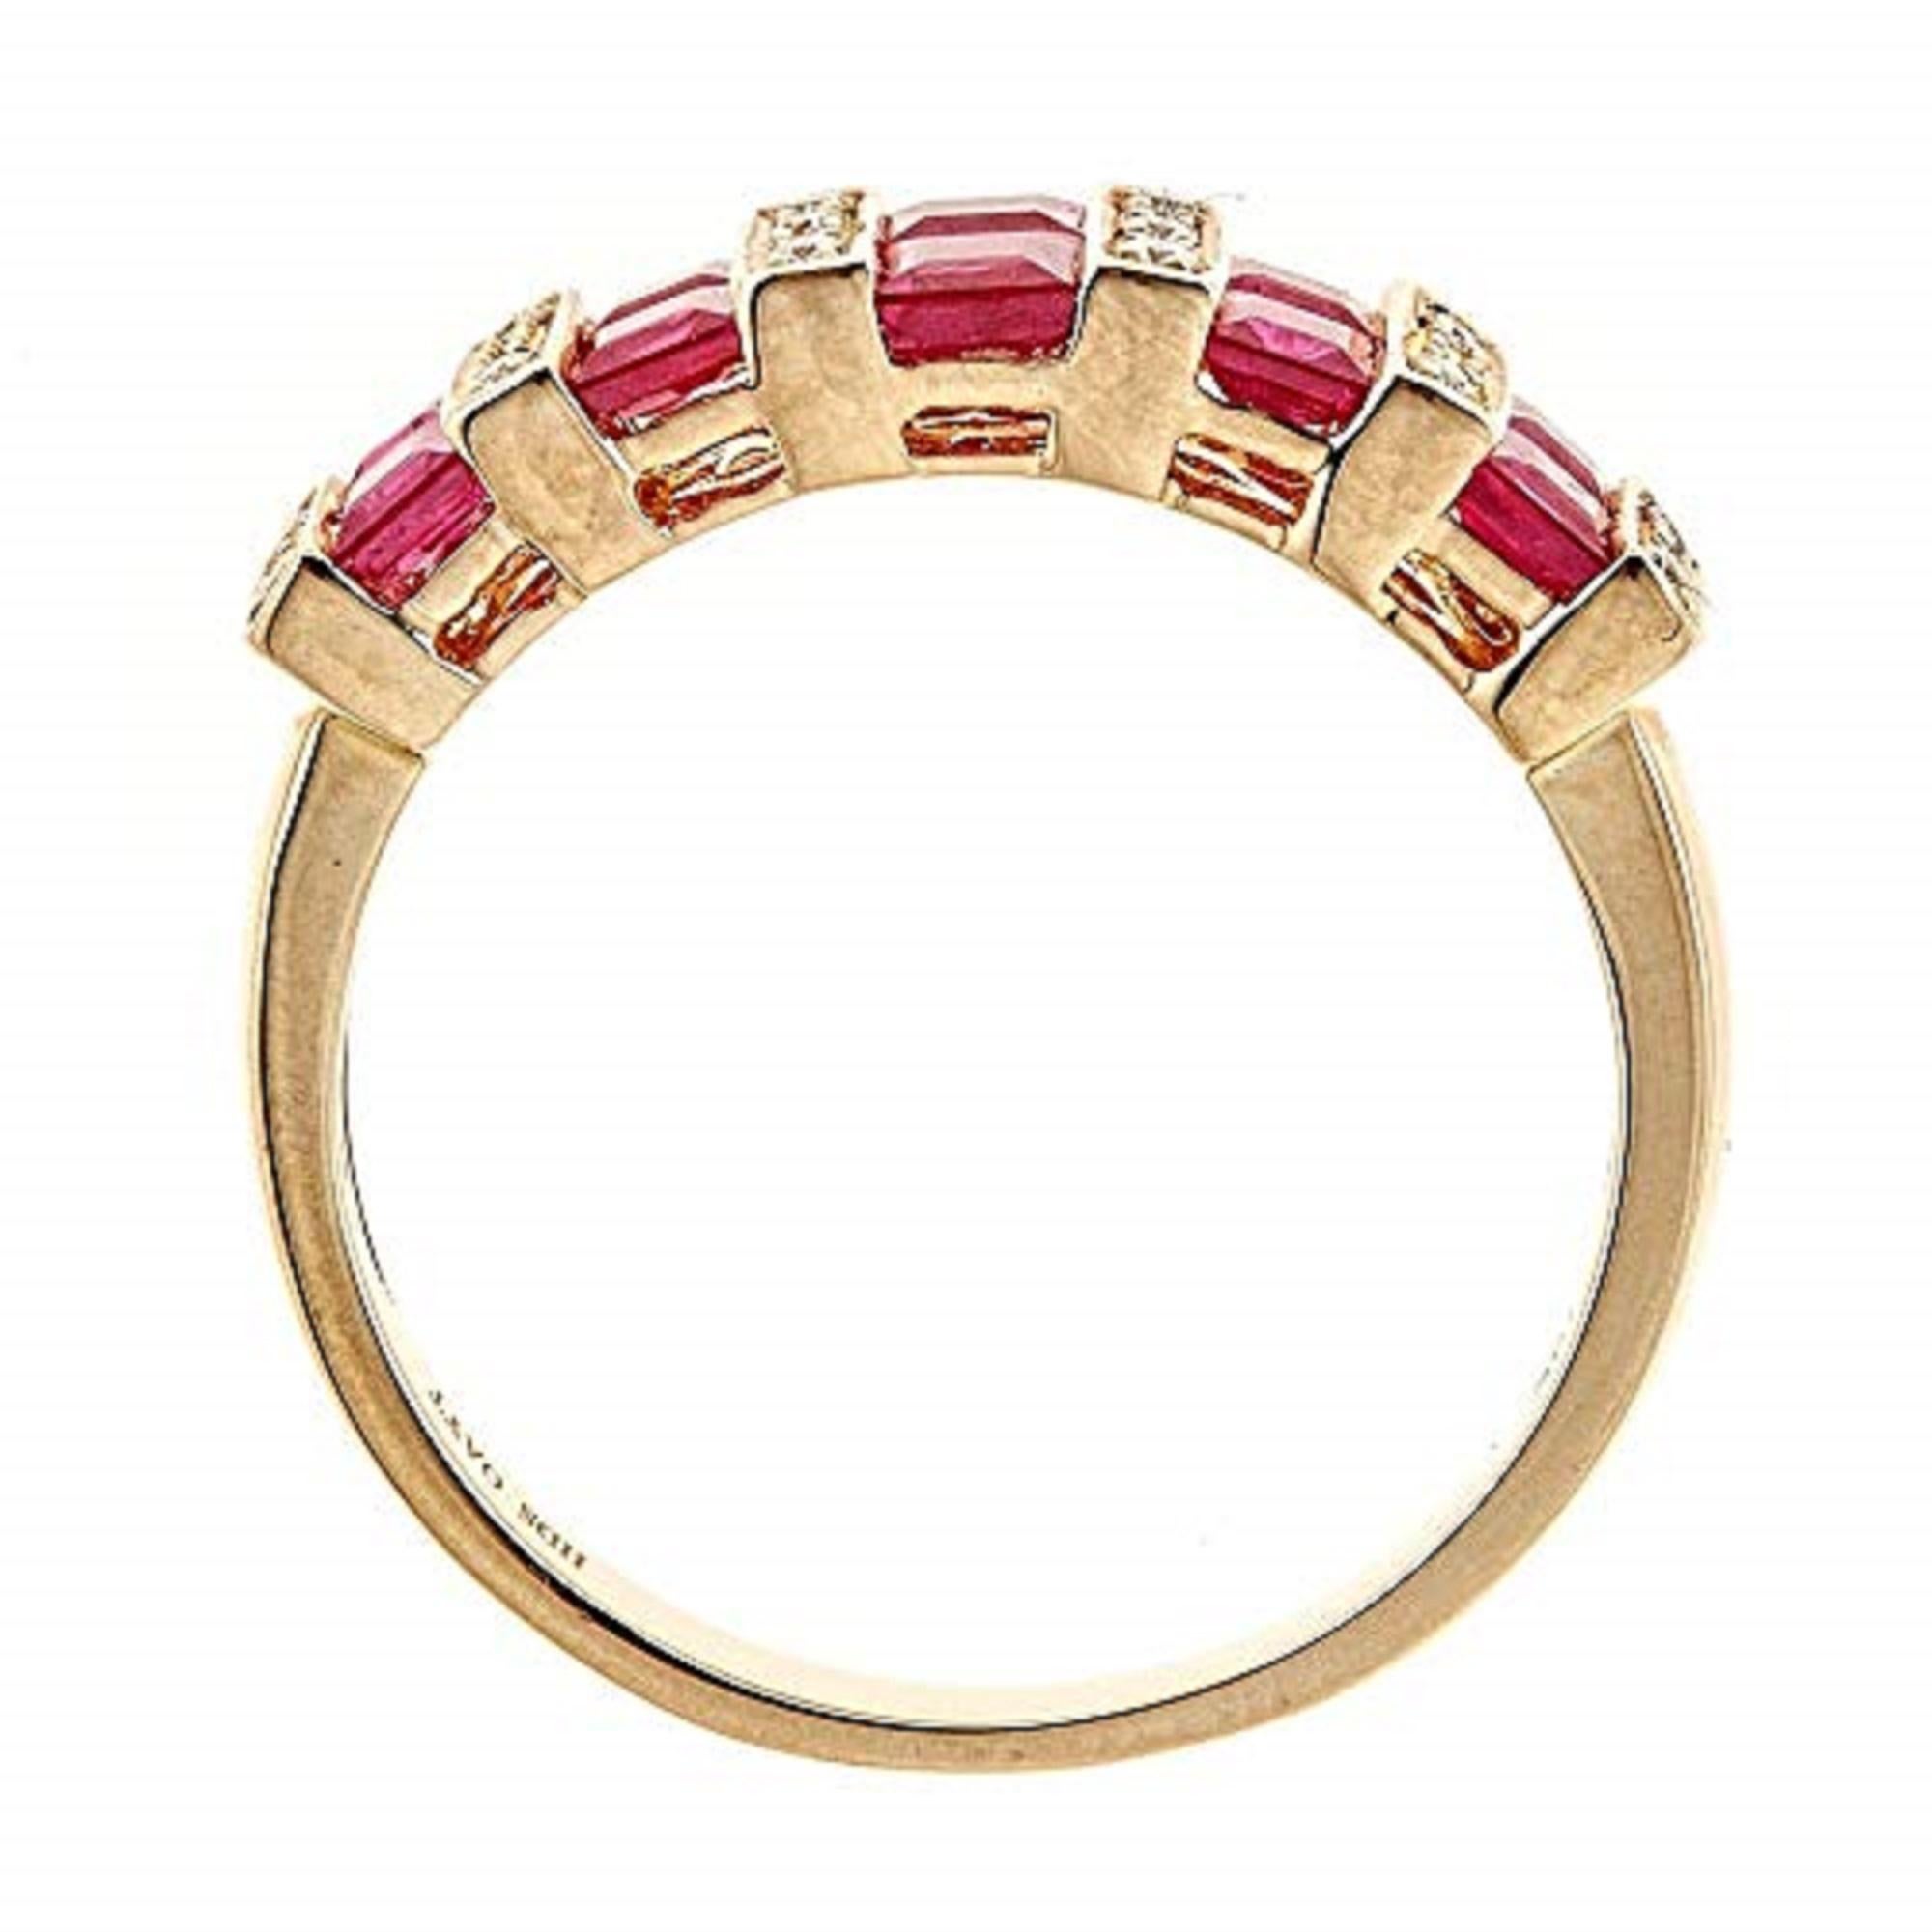 Stunning, timeless and classy eternity Unique ring. Decorate yourself in luxury with this Gin & Grace ring. This ring is made up of 3mm Square-Cut Channel Setting Genuine Ruby (2pcs) 0.39 Carat, 2.5mm Square-Cut Channel Setting Genuine Ruby (8pcs)